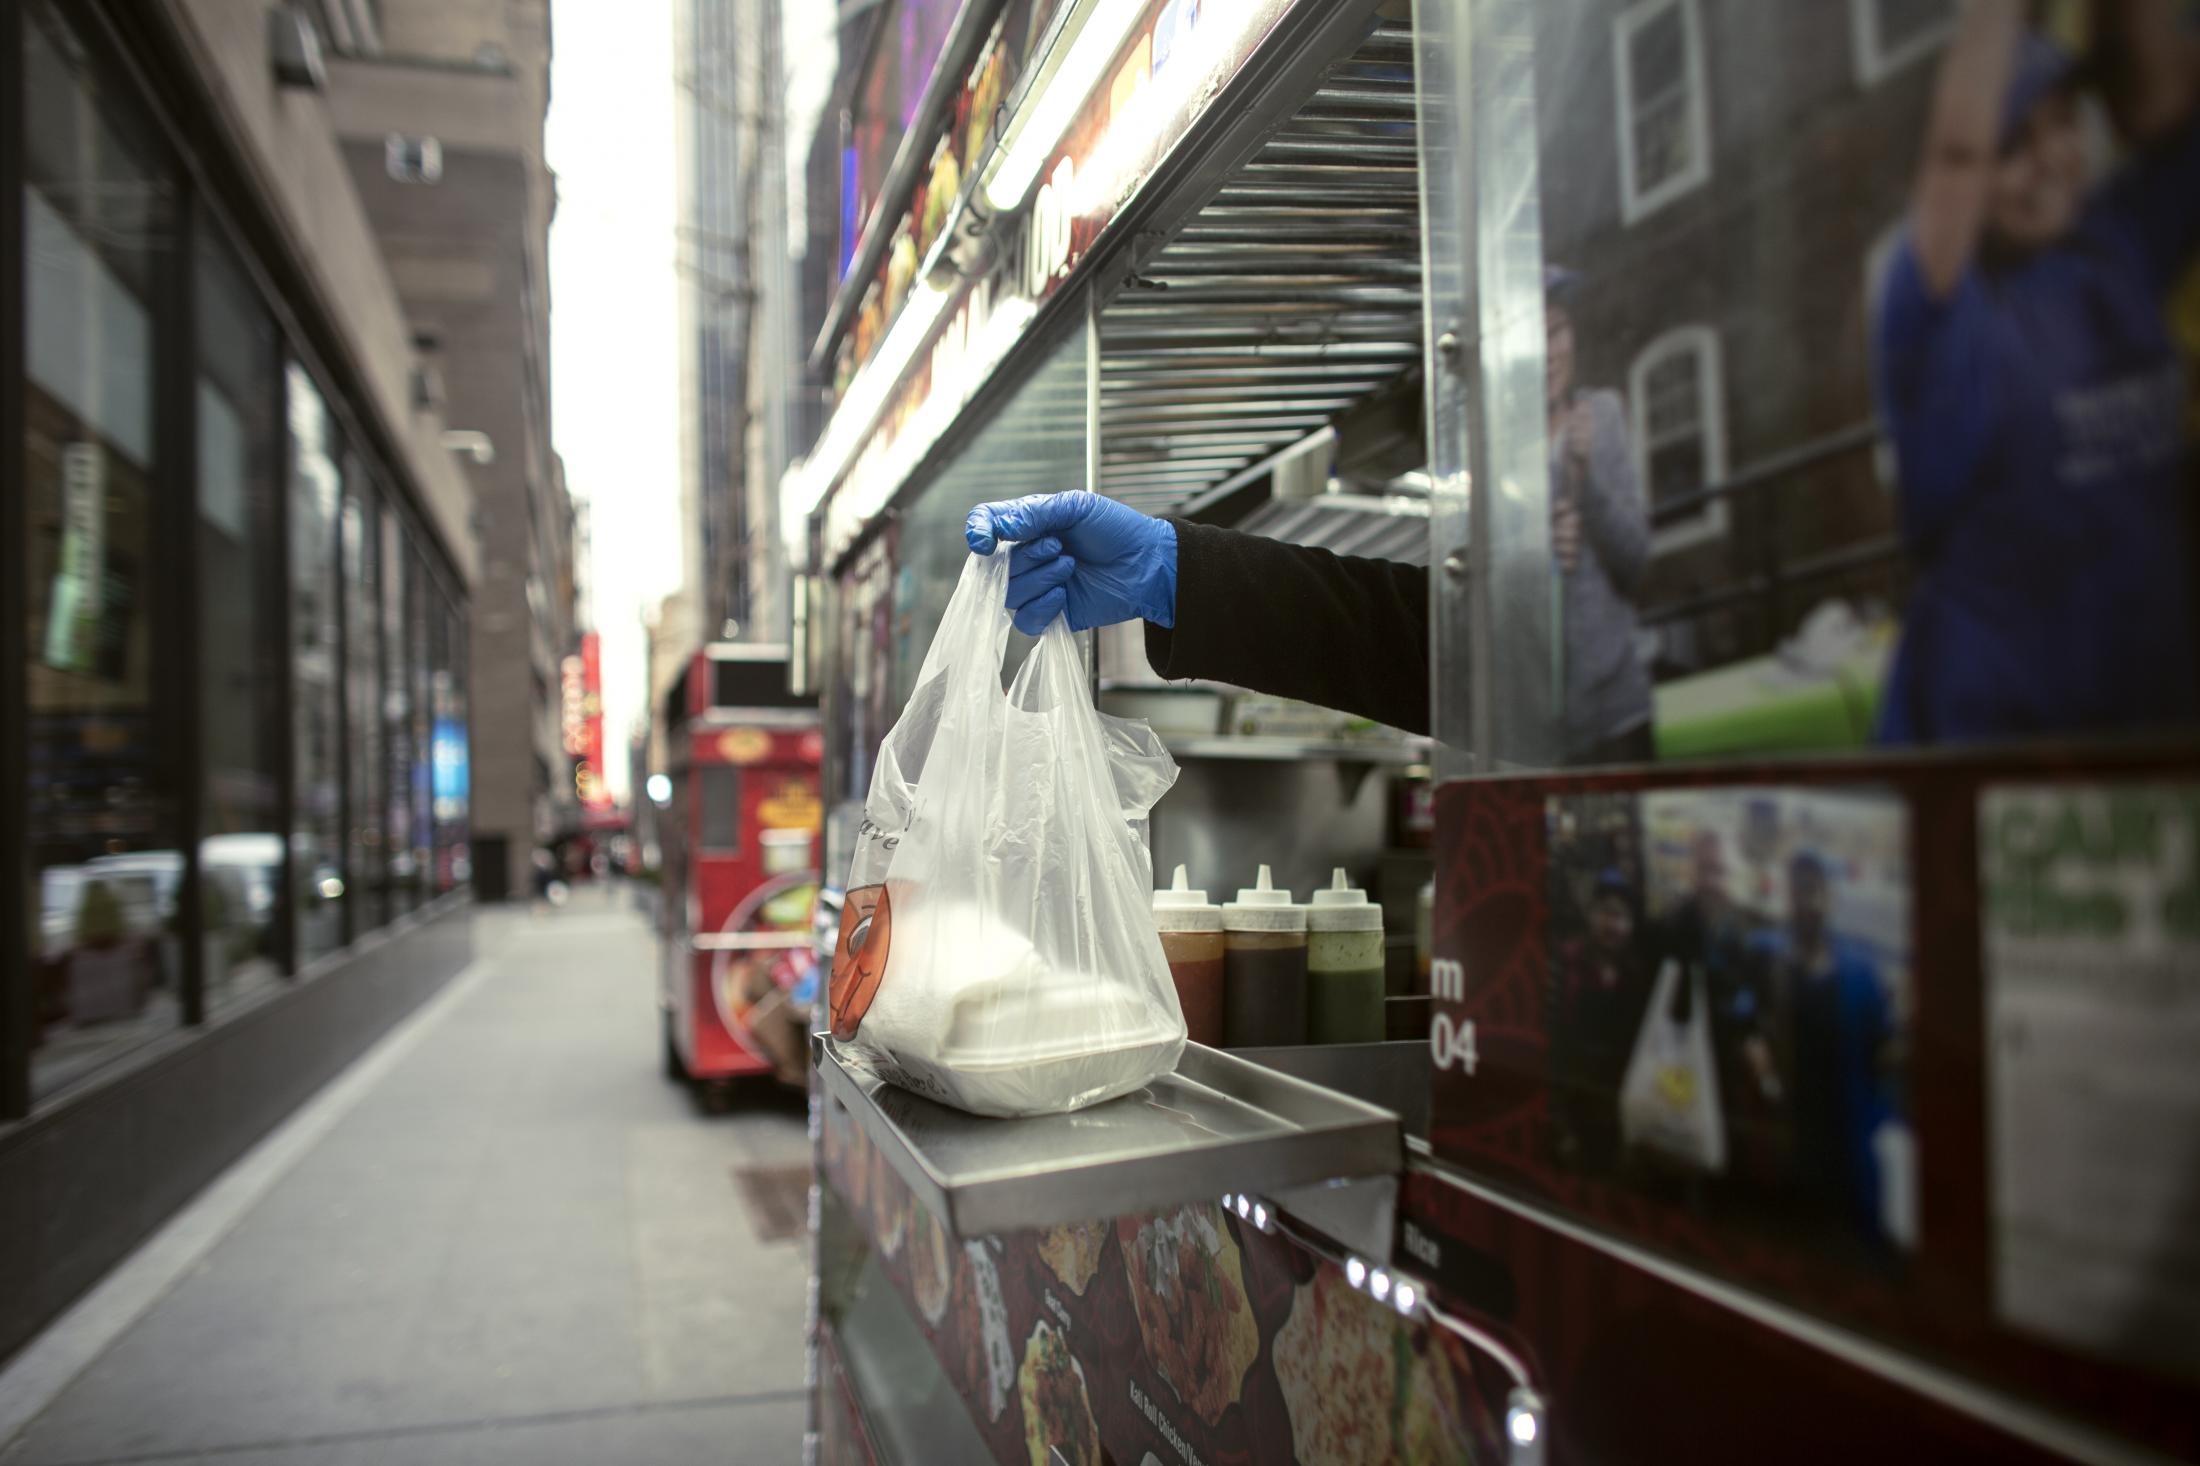 MD Alam working in his Halal food cart in Manhattan on Tuesday, January 26, 2020. He is among the street vendors in the city hoping to legally obtain licenses to sell food on the street.